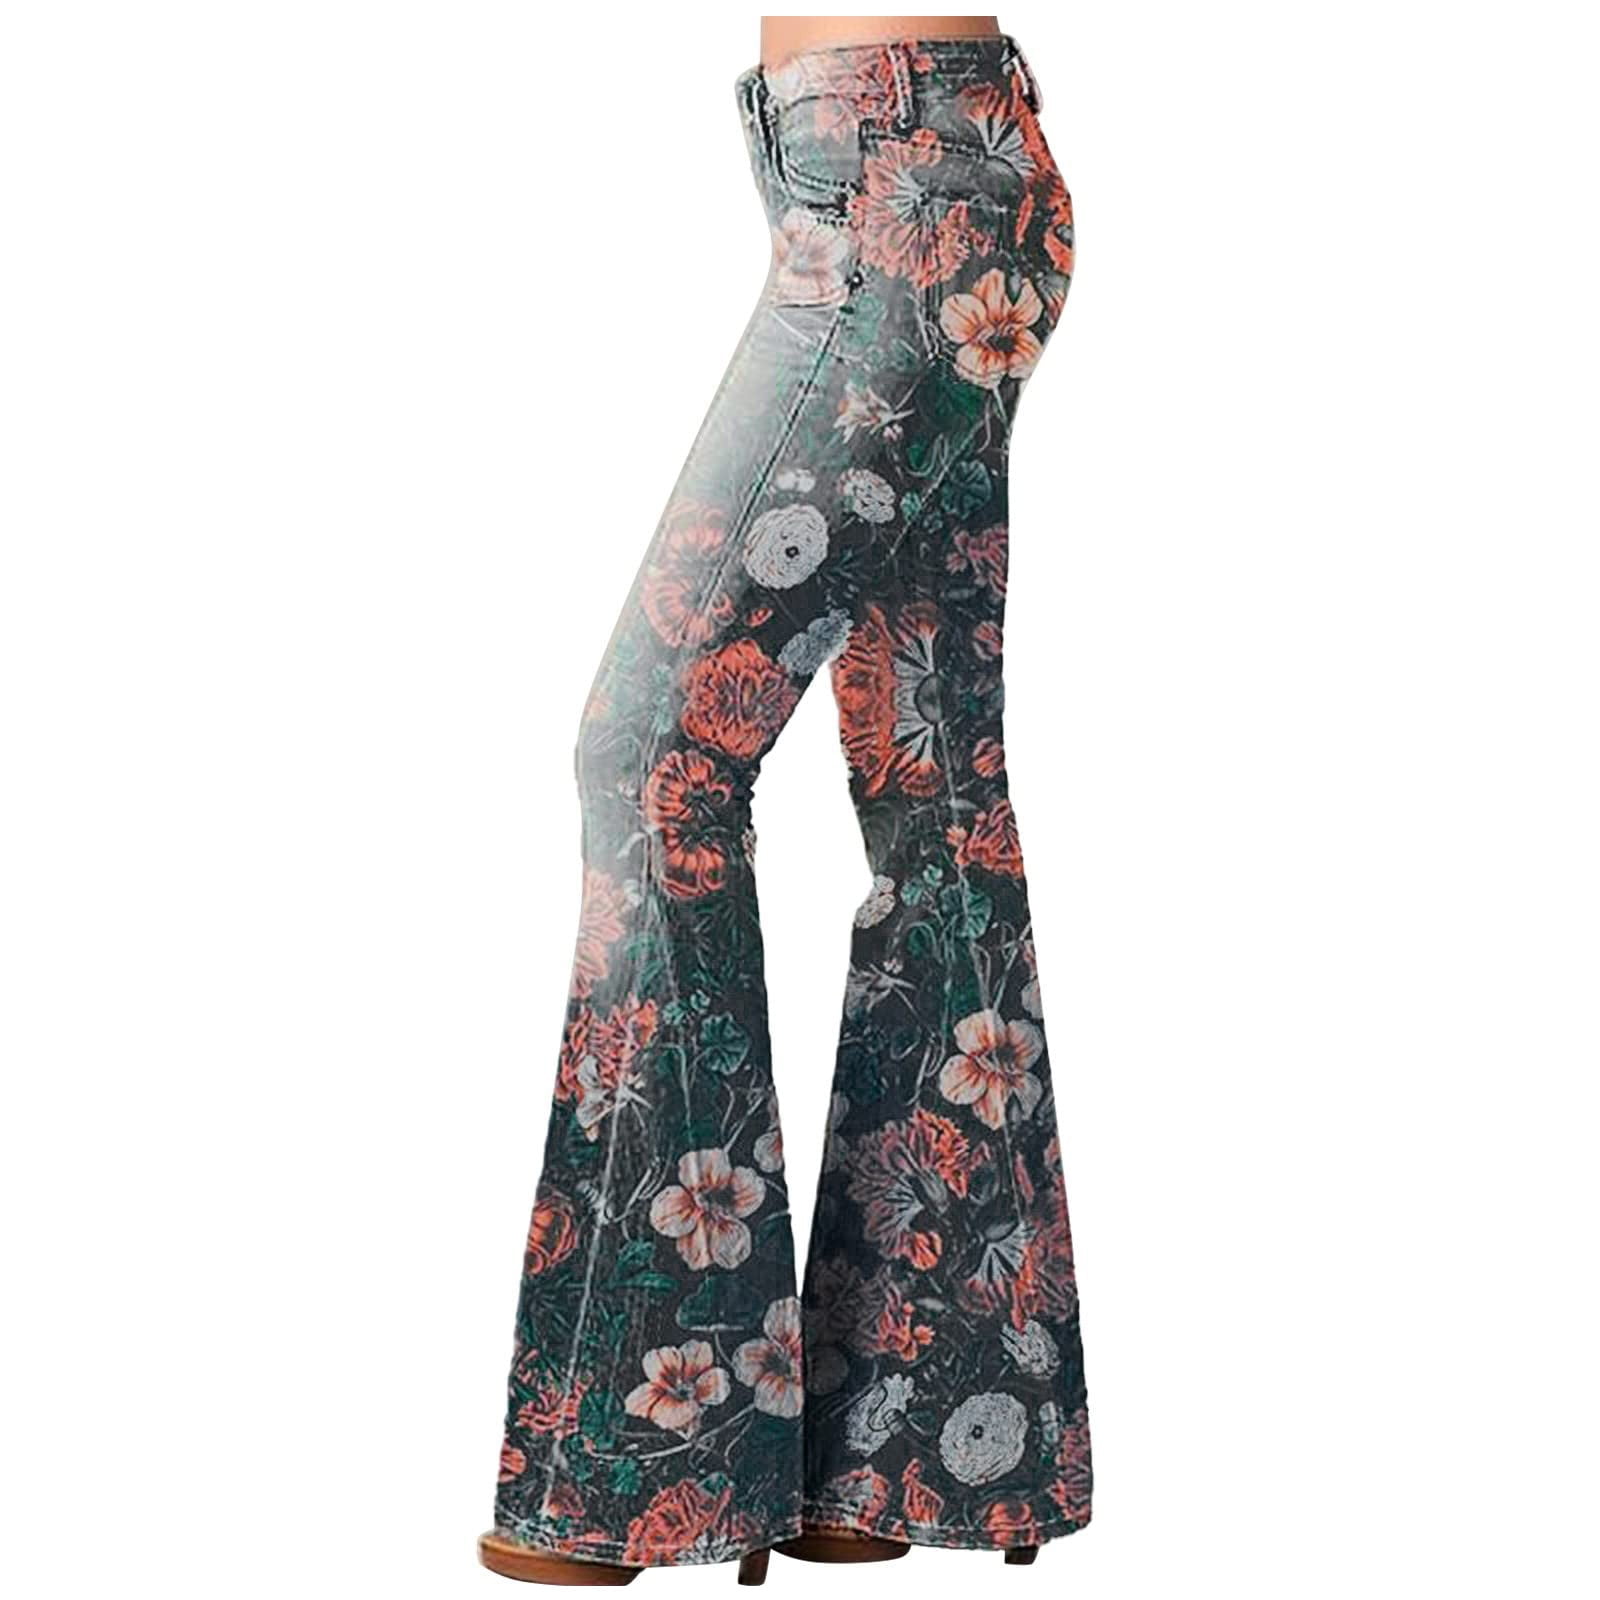 Canrulo Womens Floral Print Boho Flare Pants Casual High Waist 90s Vintage  Stretch Bell Bottom Trousers Slim Fit Streetwear Purple XXL